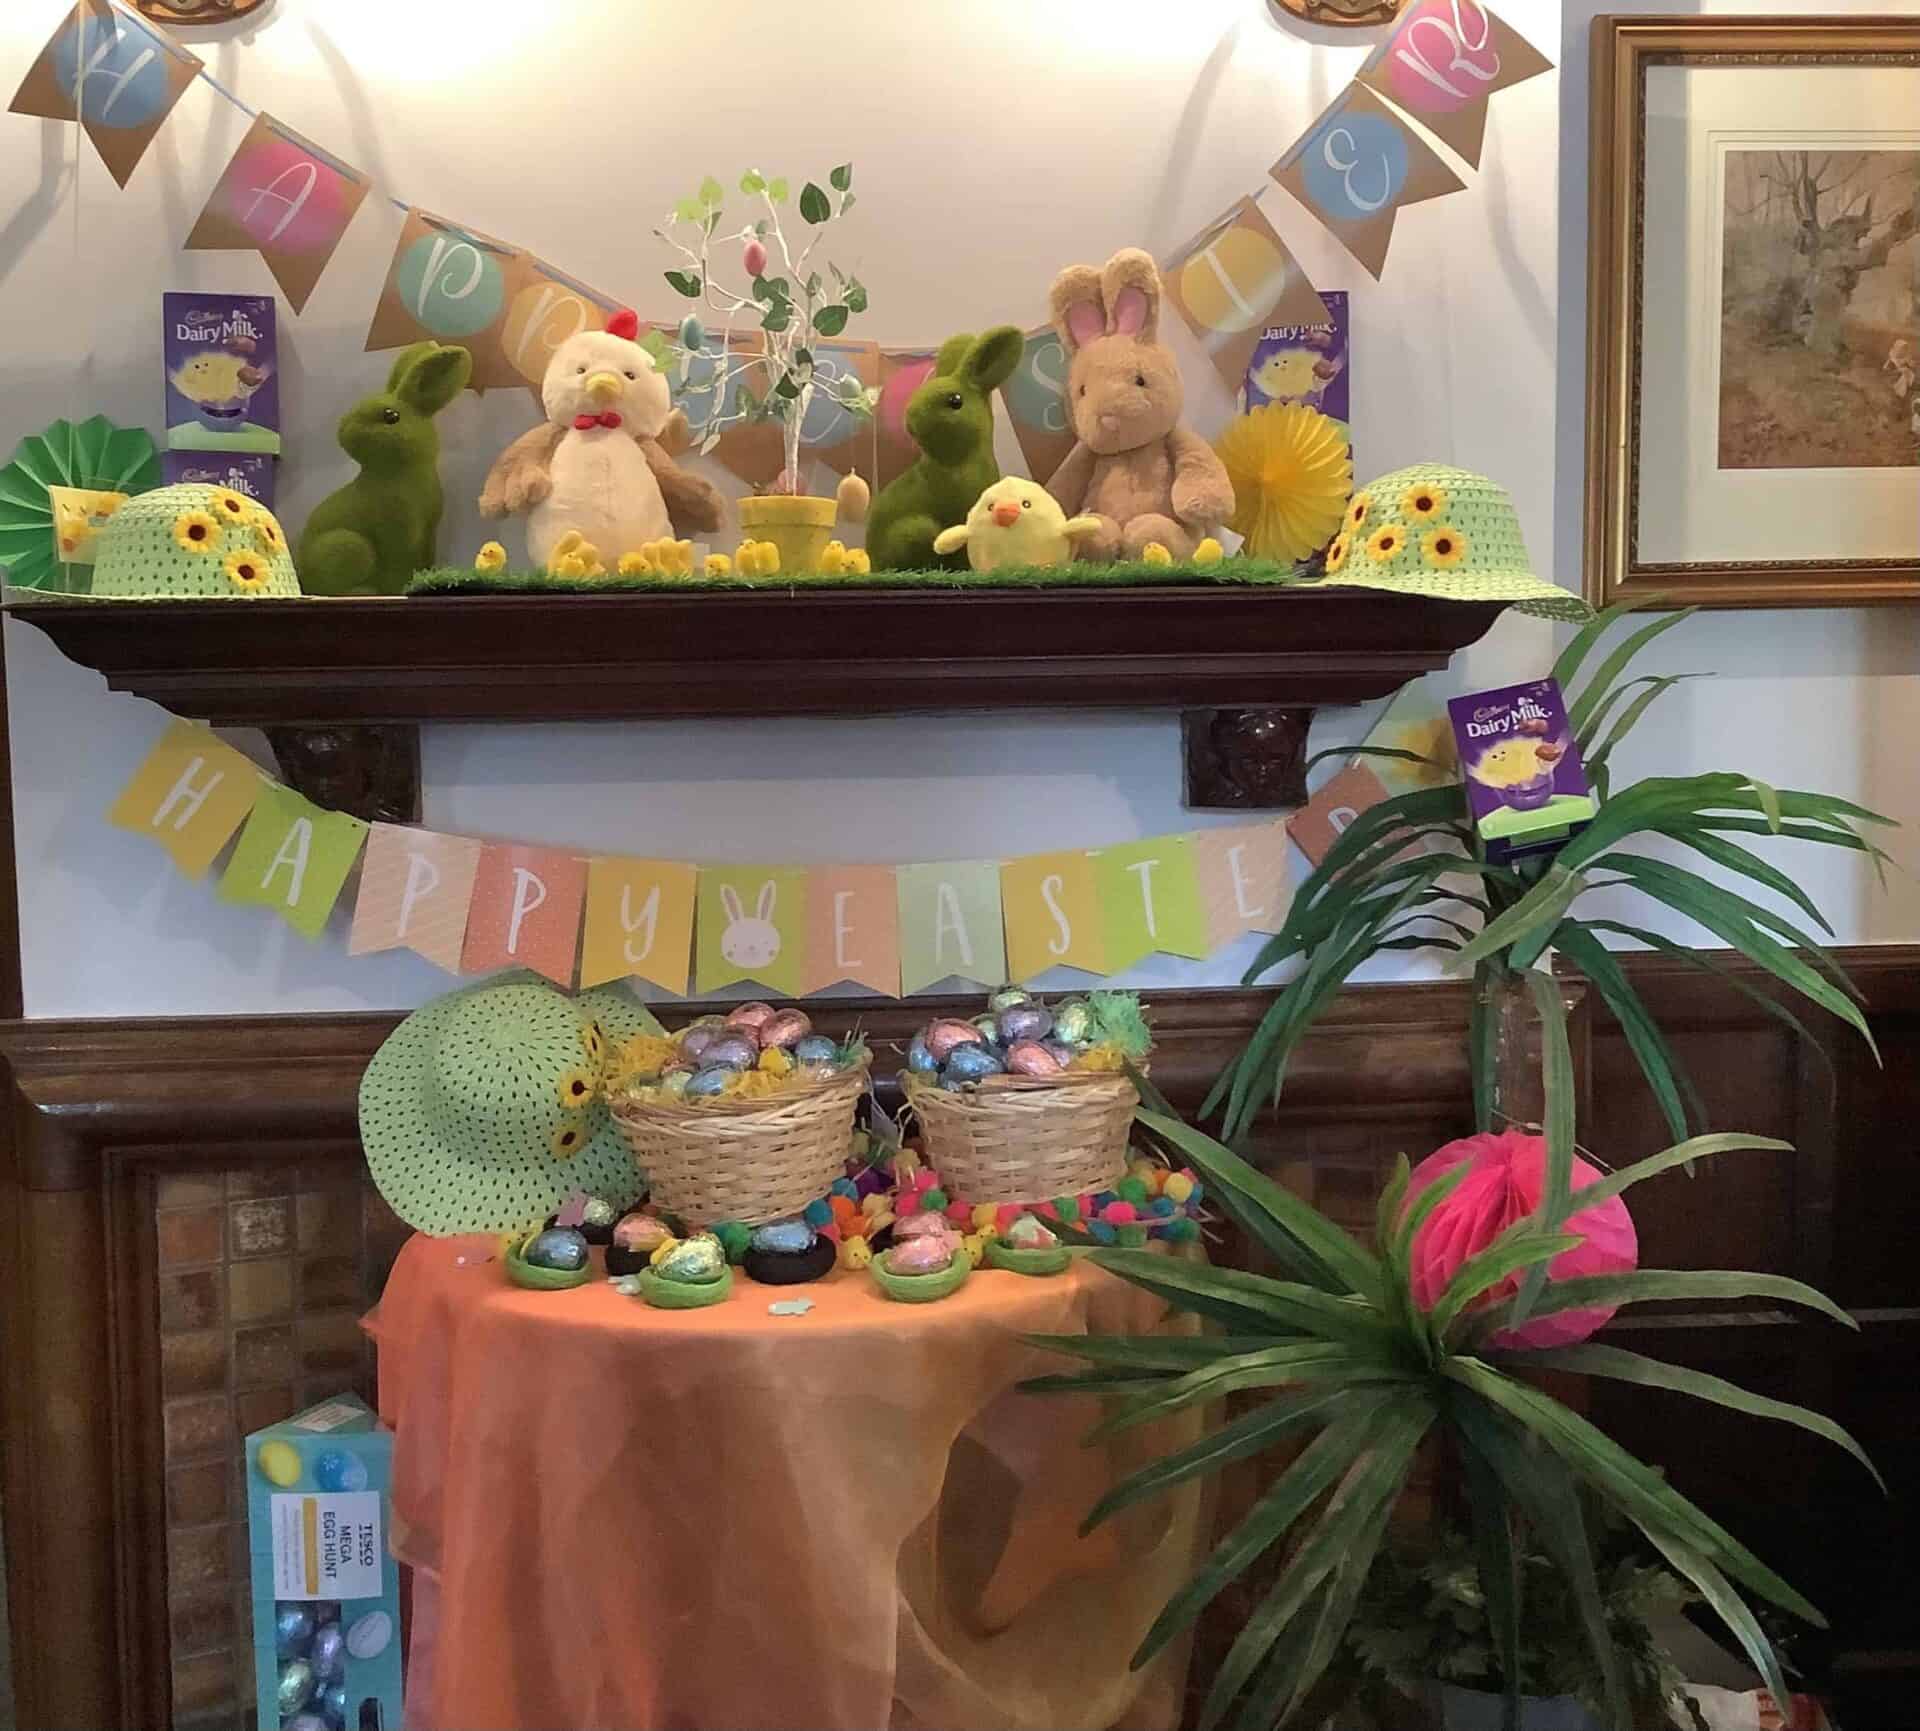 A festive Easter display with plush bunnies, colorful eggs, and themed decorations on a mantle and table at the Oxford House.